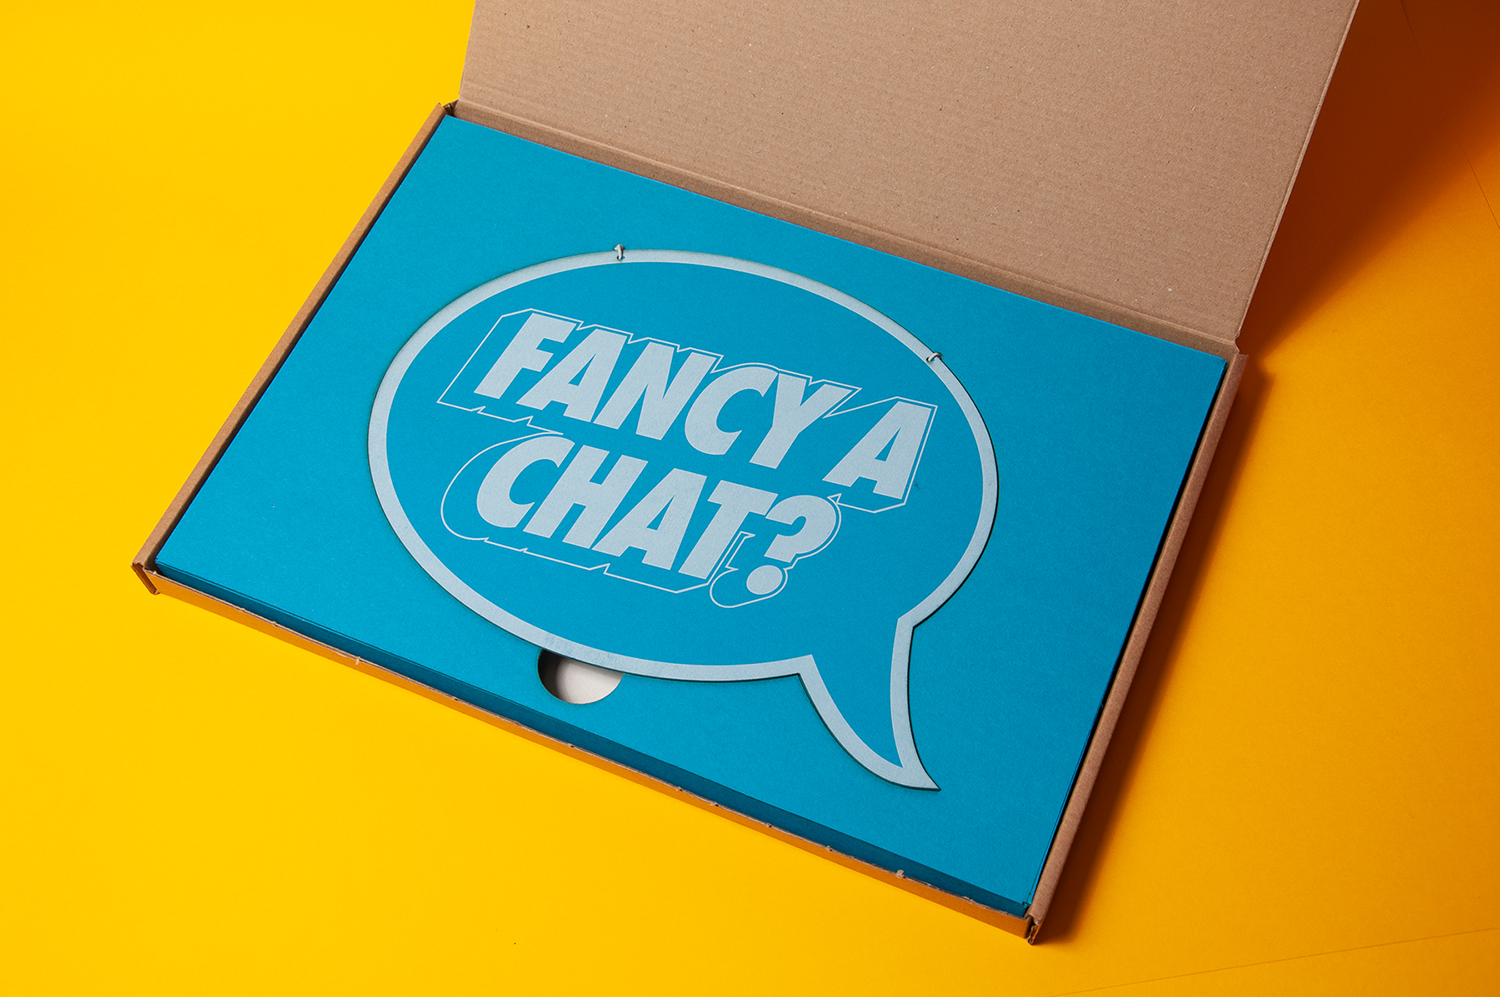 A photograph of the cardboard box, open, on a yellow background. Inside the box is a bright blue insert which holds a bright blue speech bubble shaped sign.